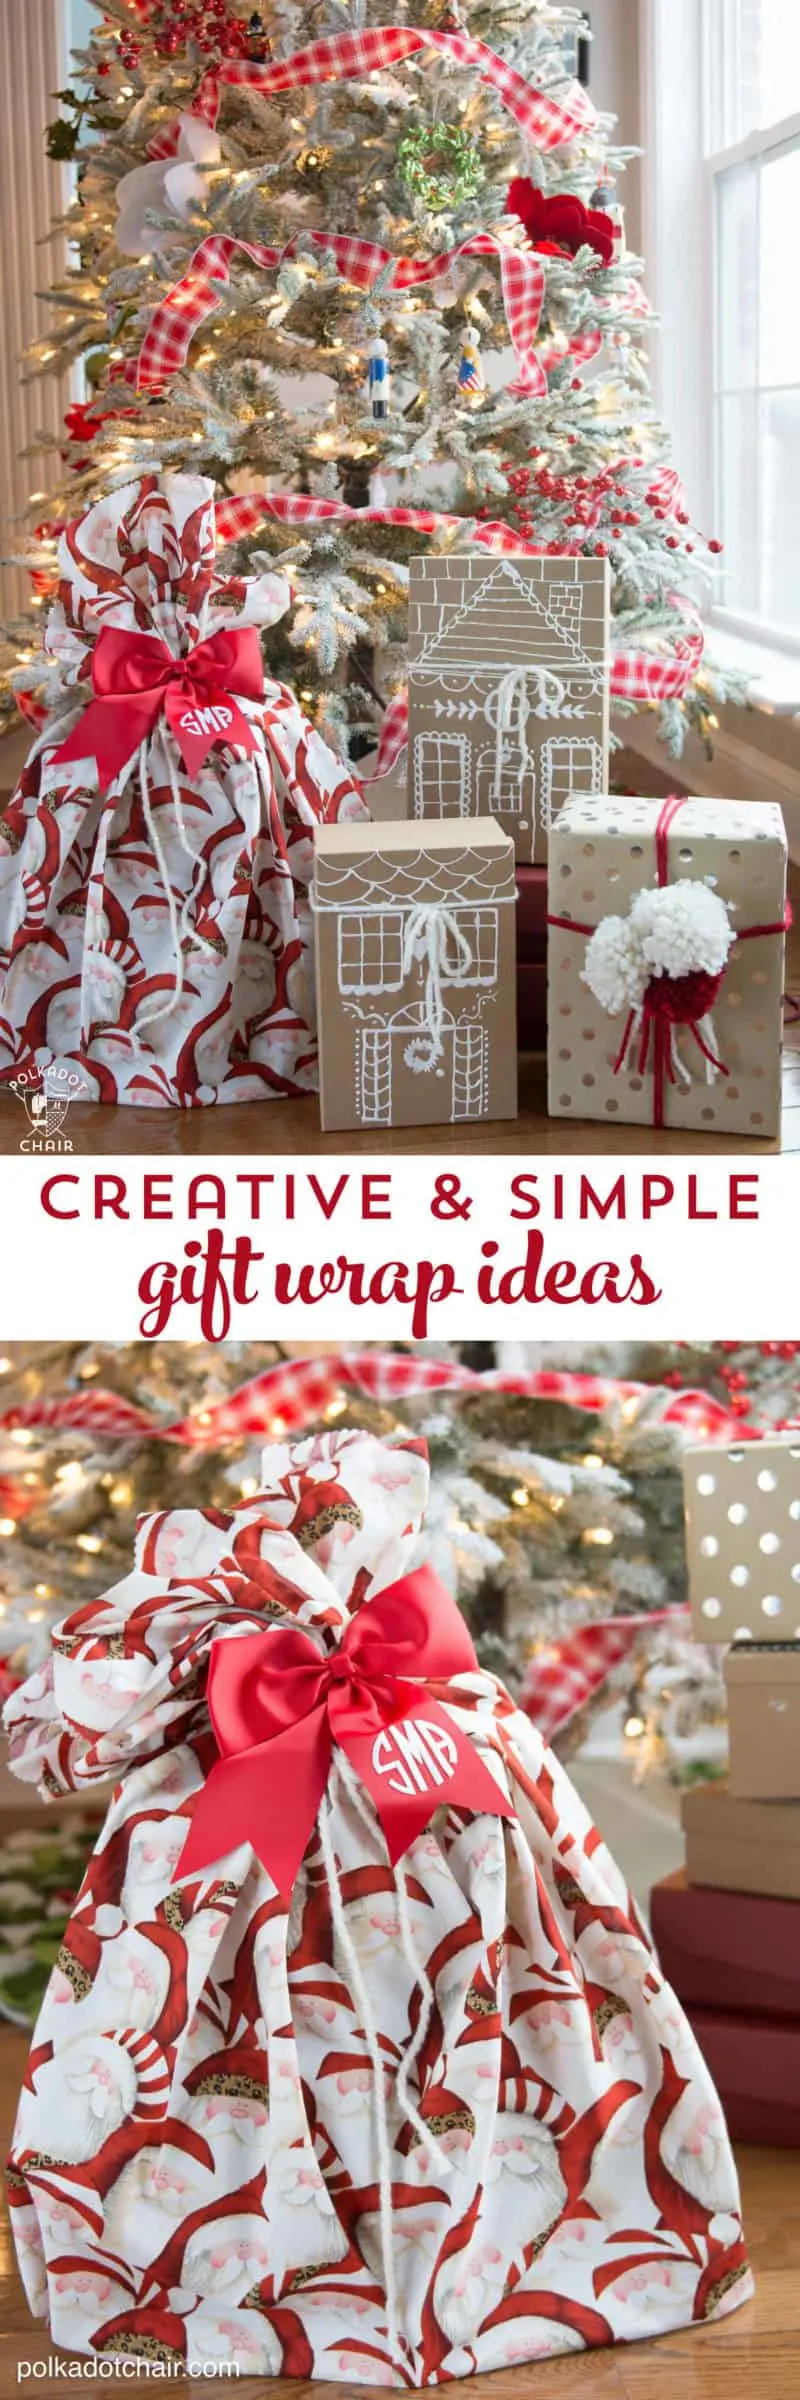 diy gift wrap ideas cfreating a homemade Santa sac and others with craft paper